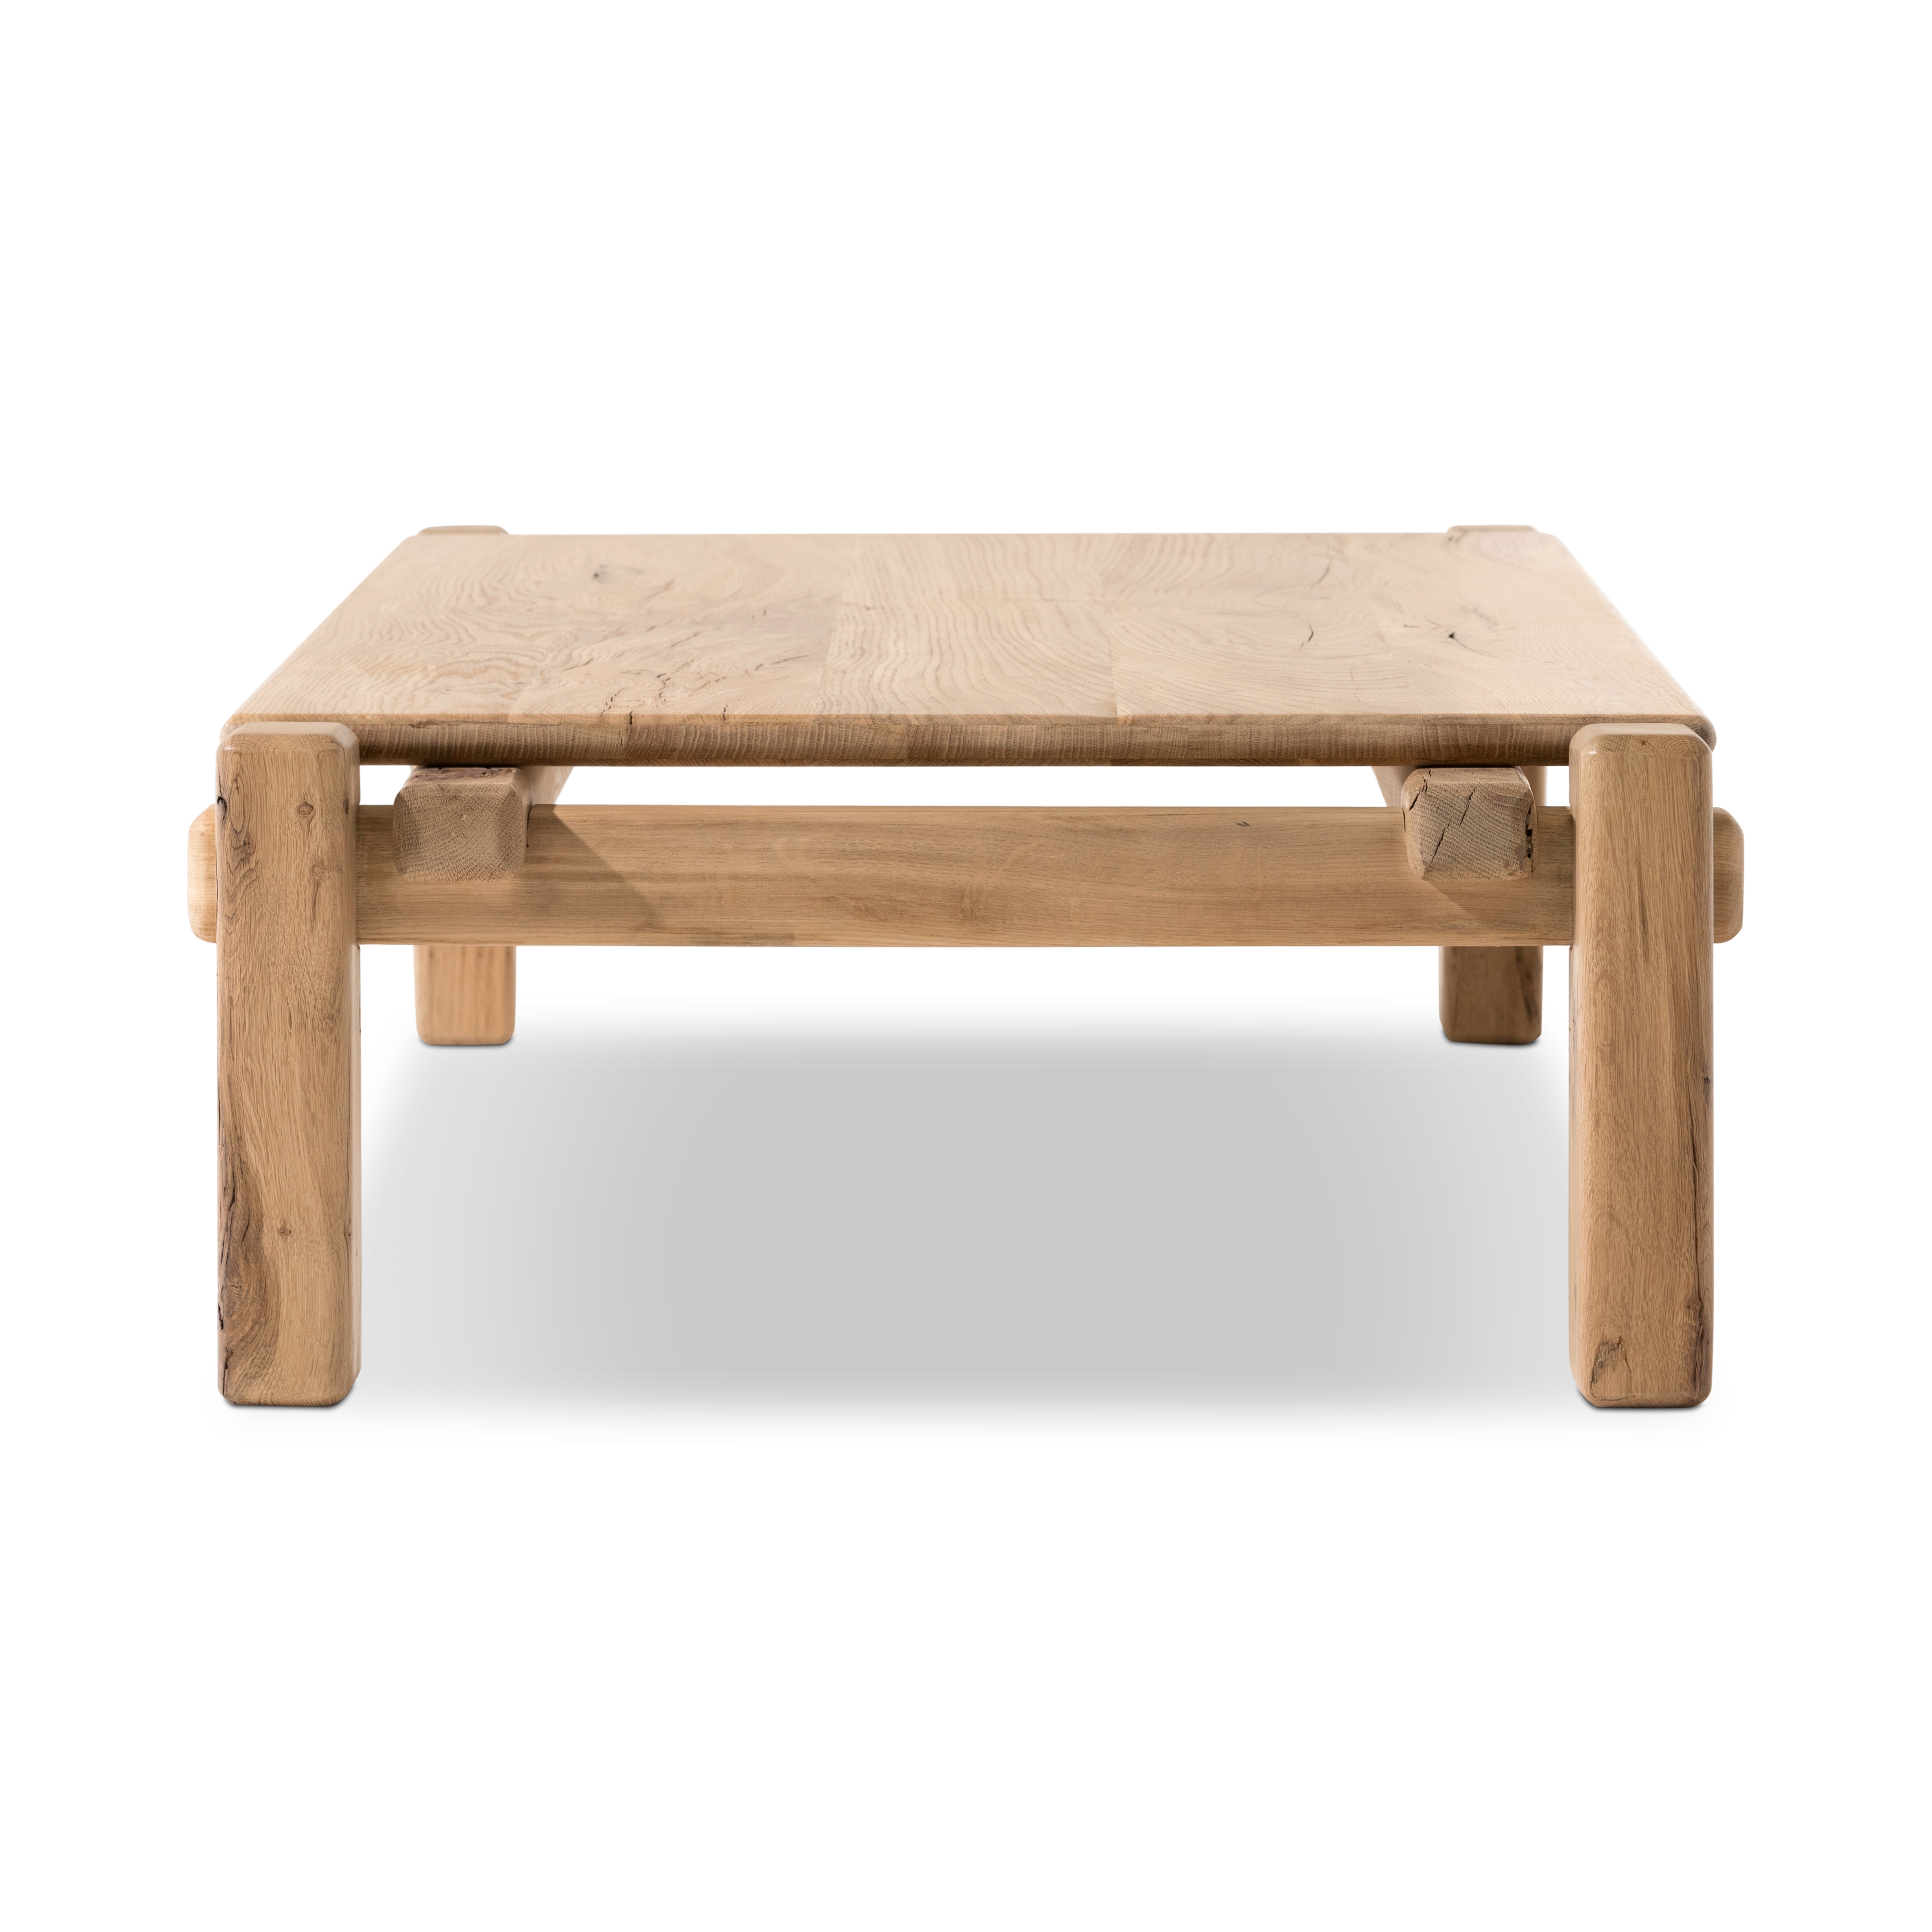 Marcia Large Coffee Table-French Oak - Image 4